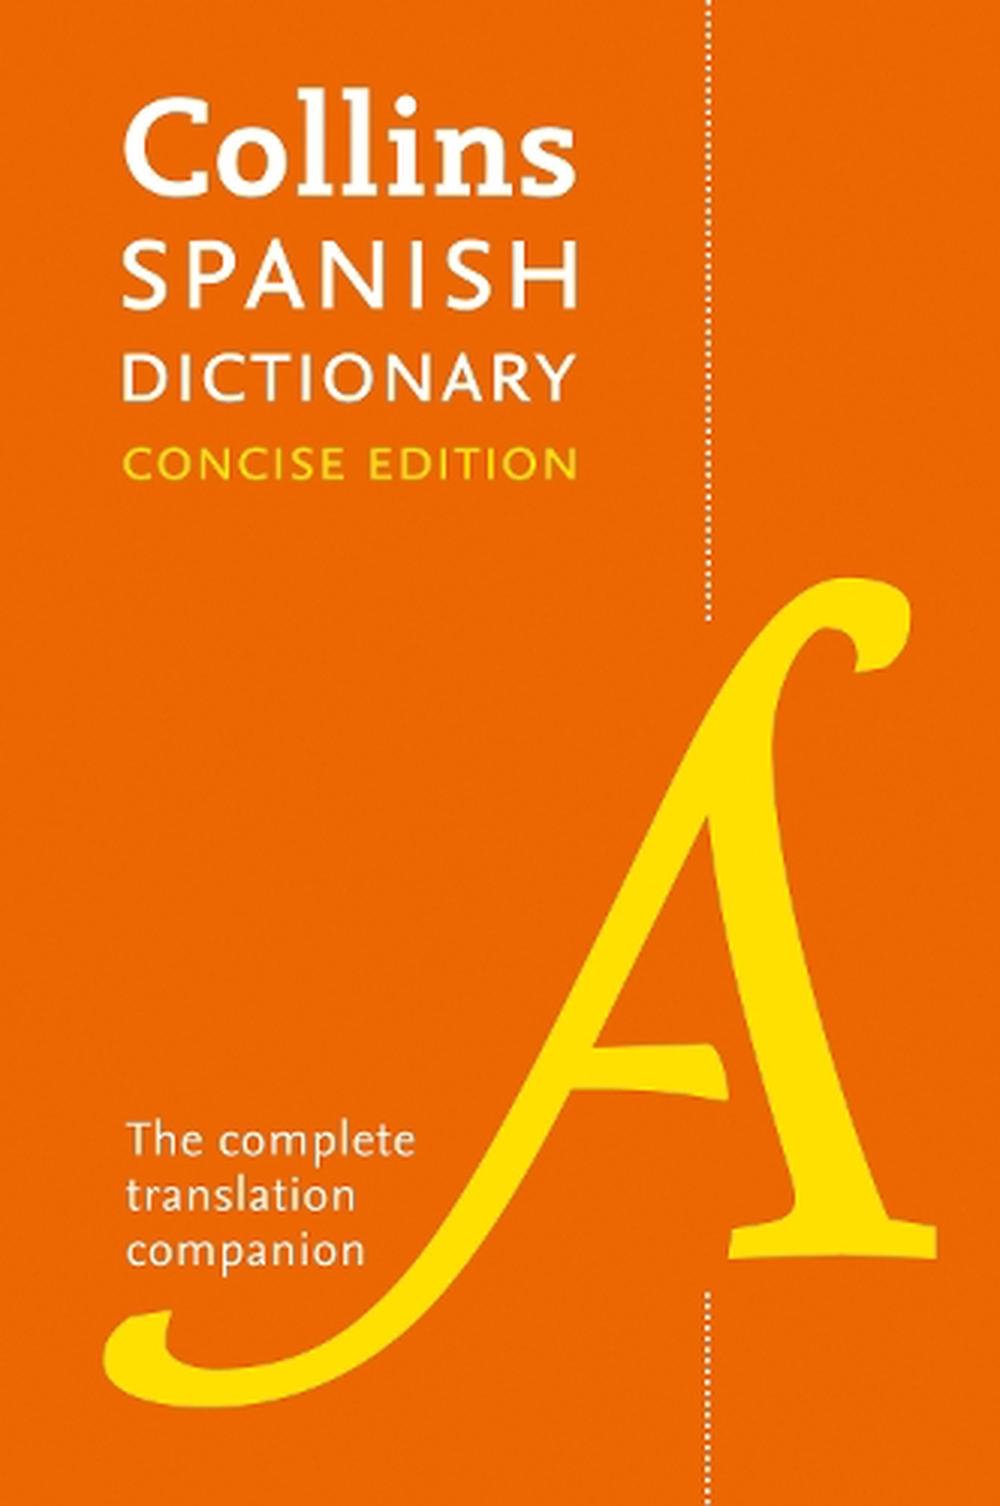 Spanish Concise Dictionary The Complete Translation Companion by